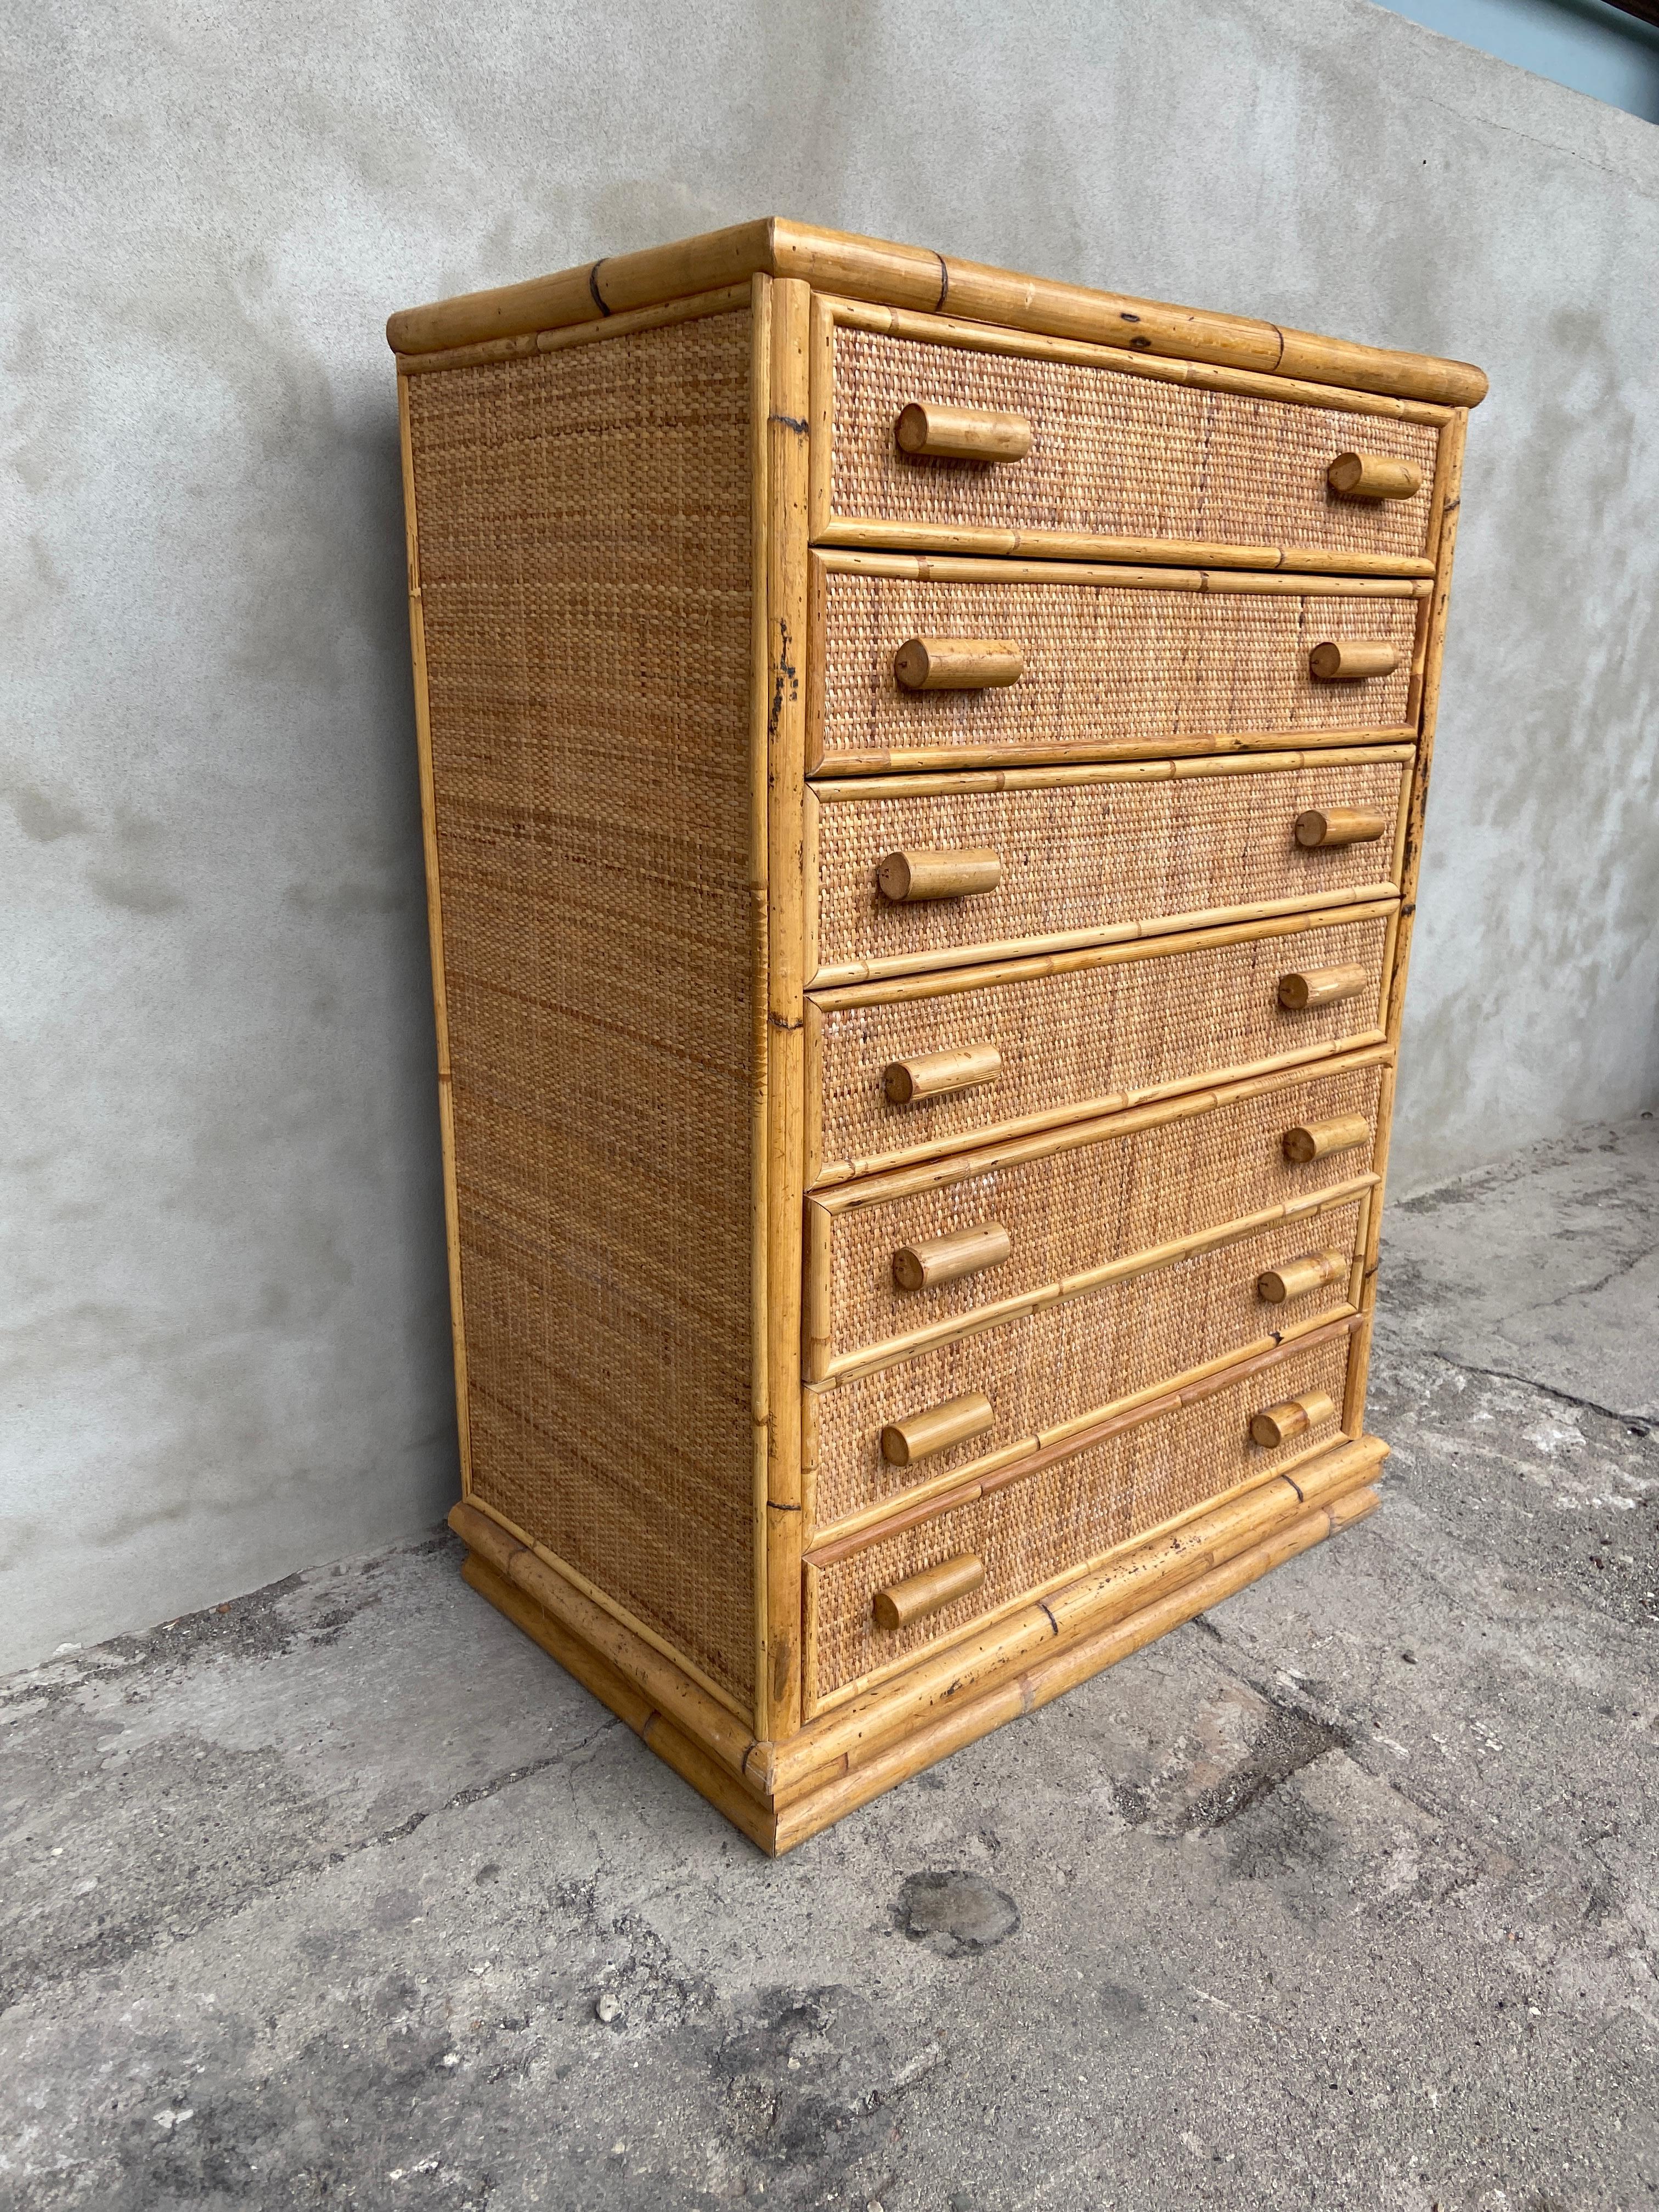 Mid-Century Modern Italian tall boy or chest of drawers in Bamboo and Rattan from 1970s
This objets has a beautiful patina due to age and use and is in really good vintage conditions